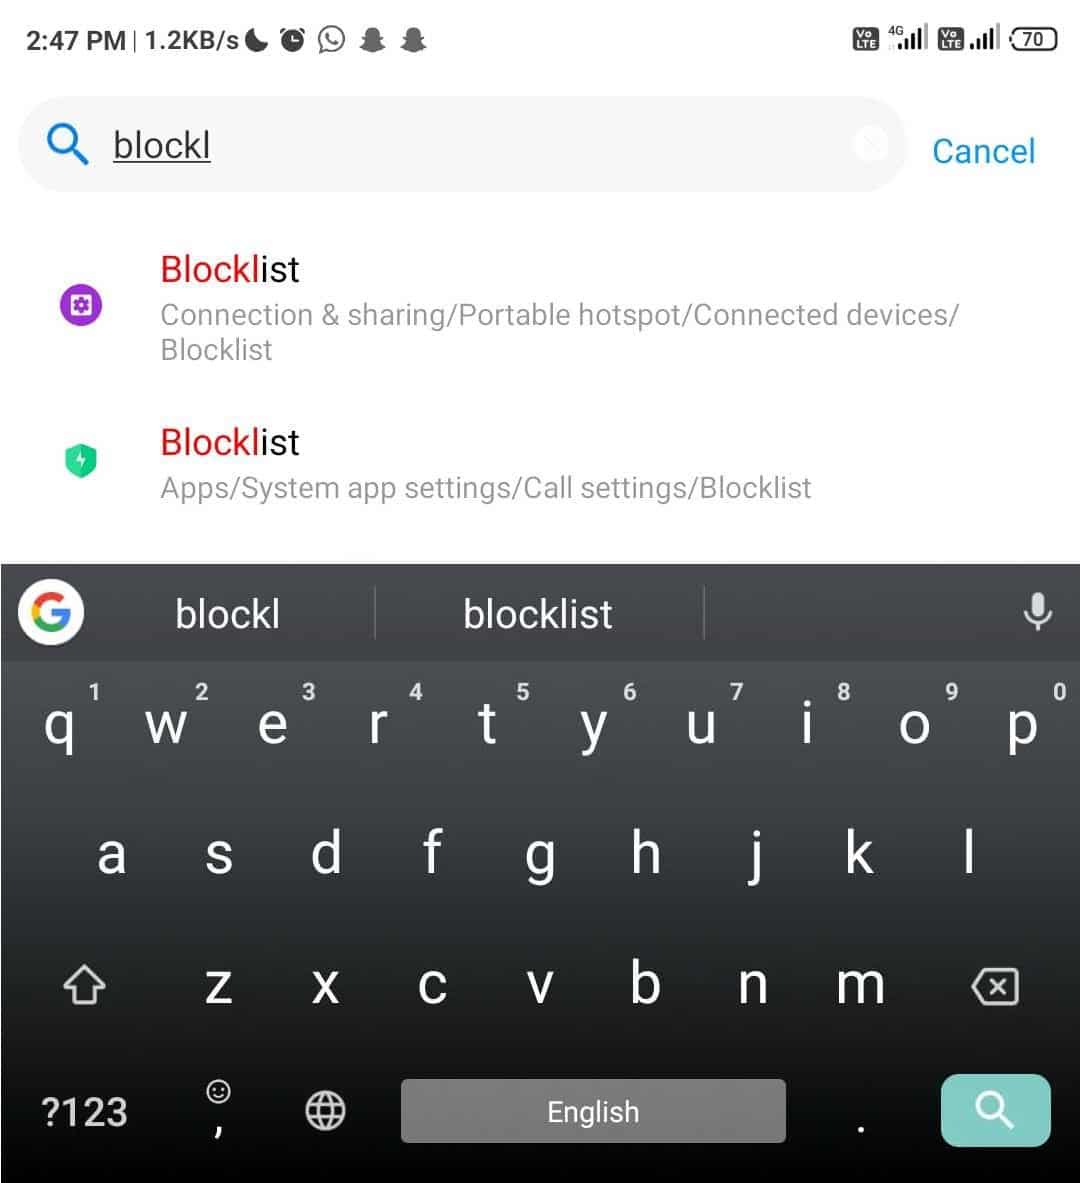 Under Settings, search Blocklist in the search bar